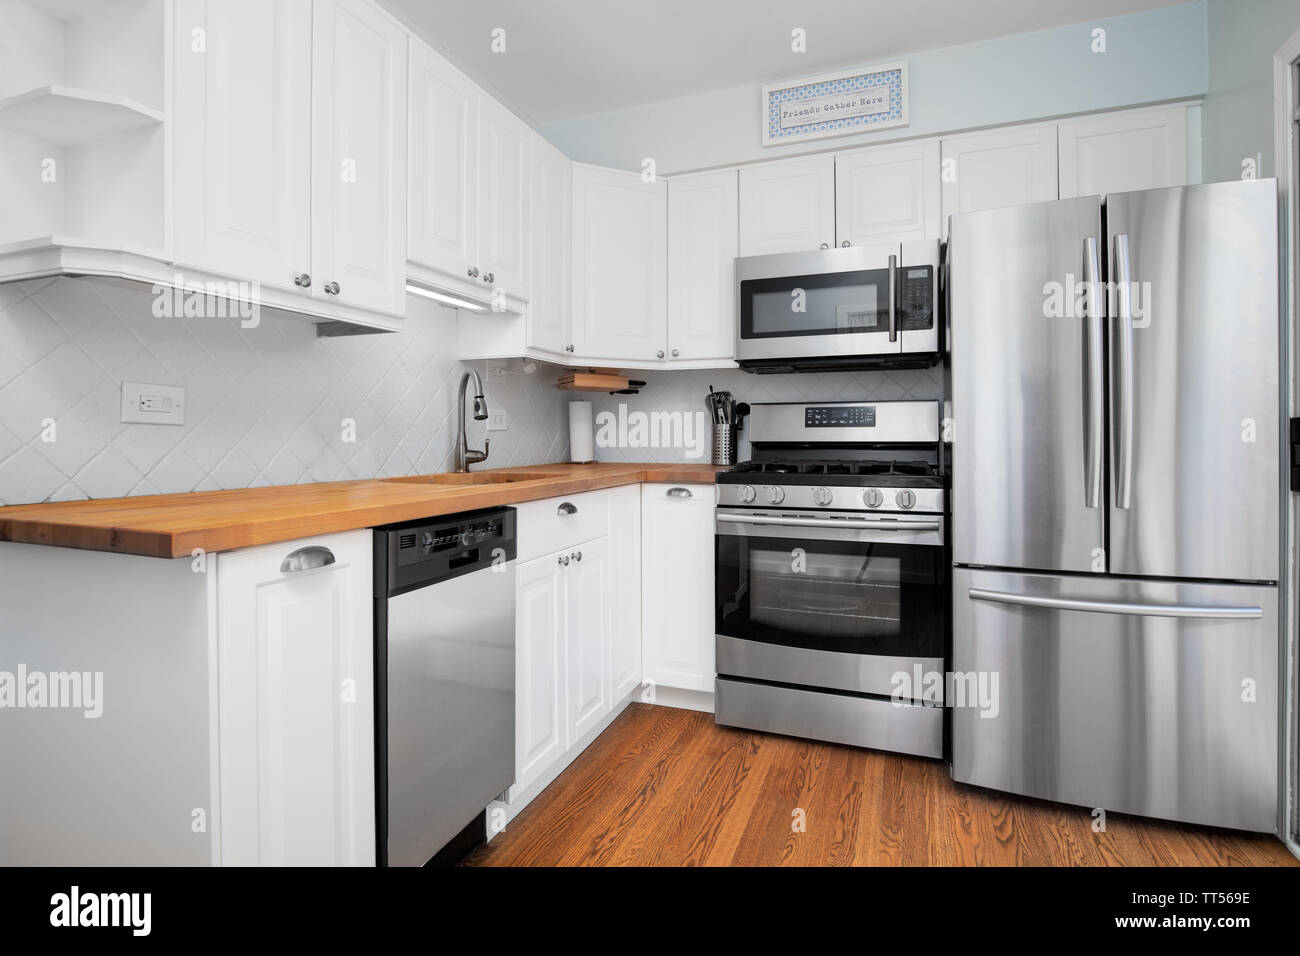 https://c8.alamy.com/comp/TT569E/a-small-kitchen-with-stainless-steel-appliances-white-cabinets-and-a-natural-light-colored-wood-counter-top-TT569E.jpg